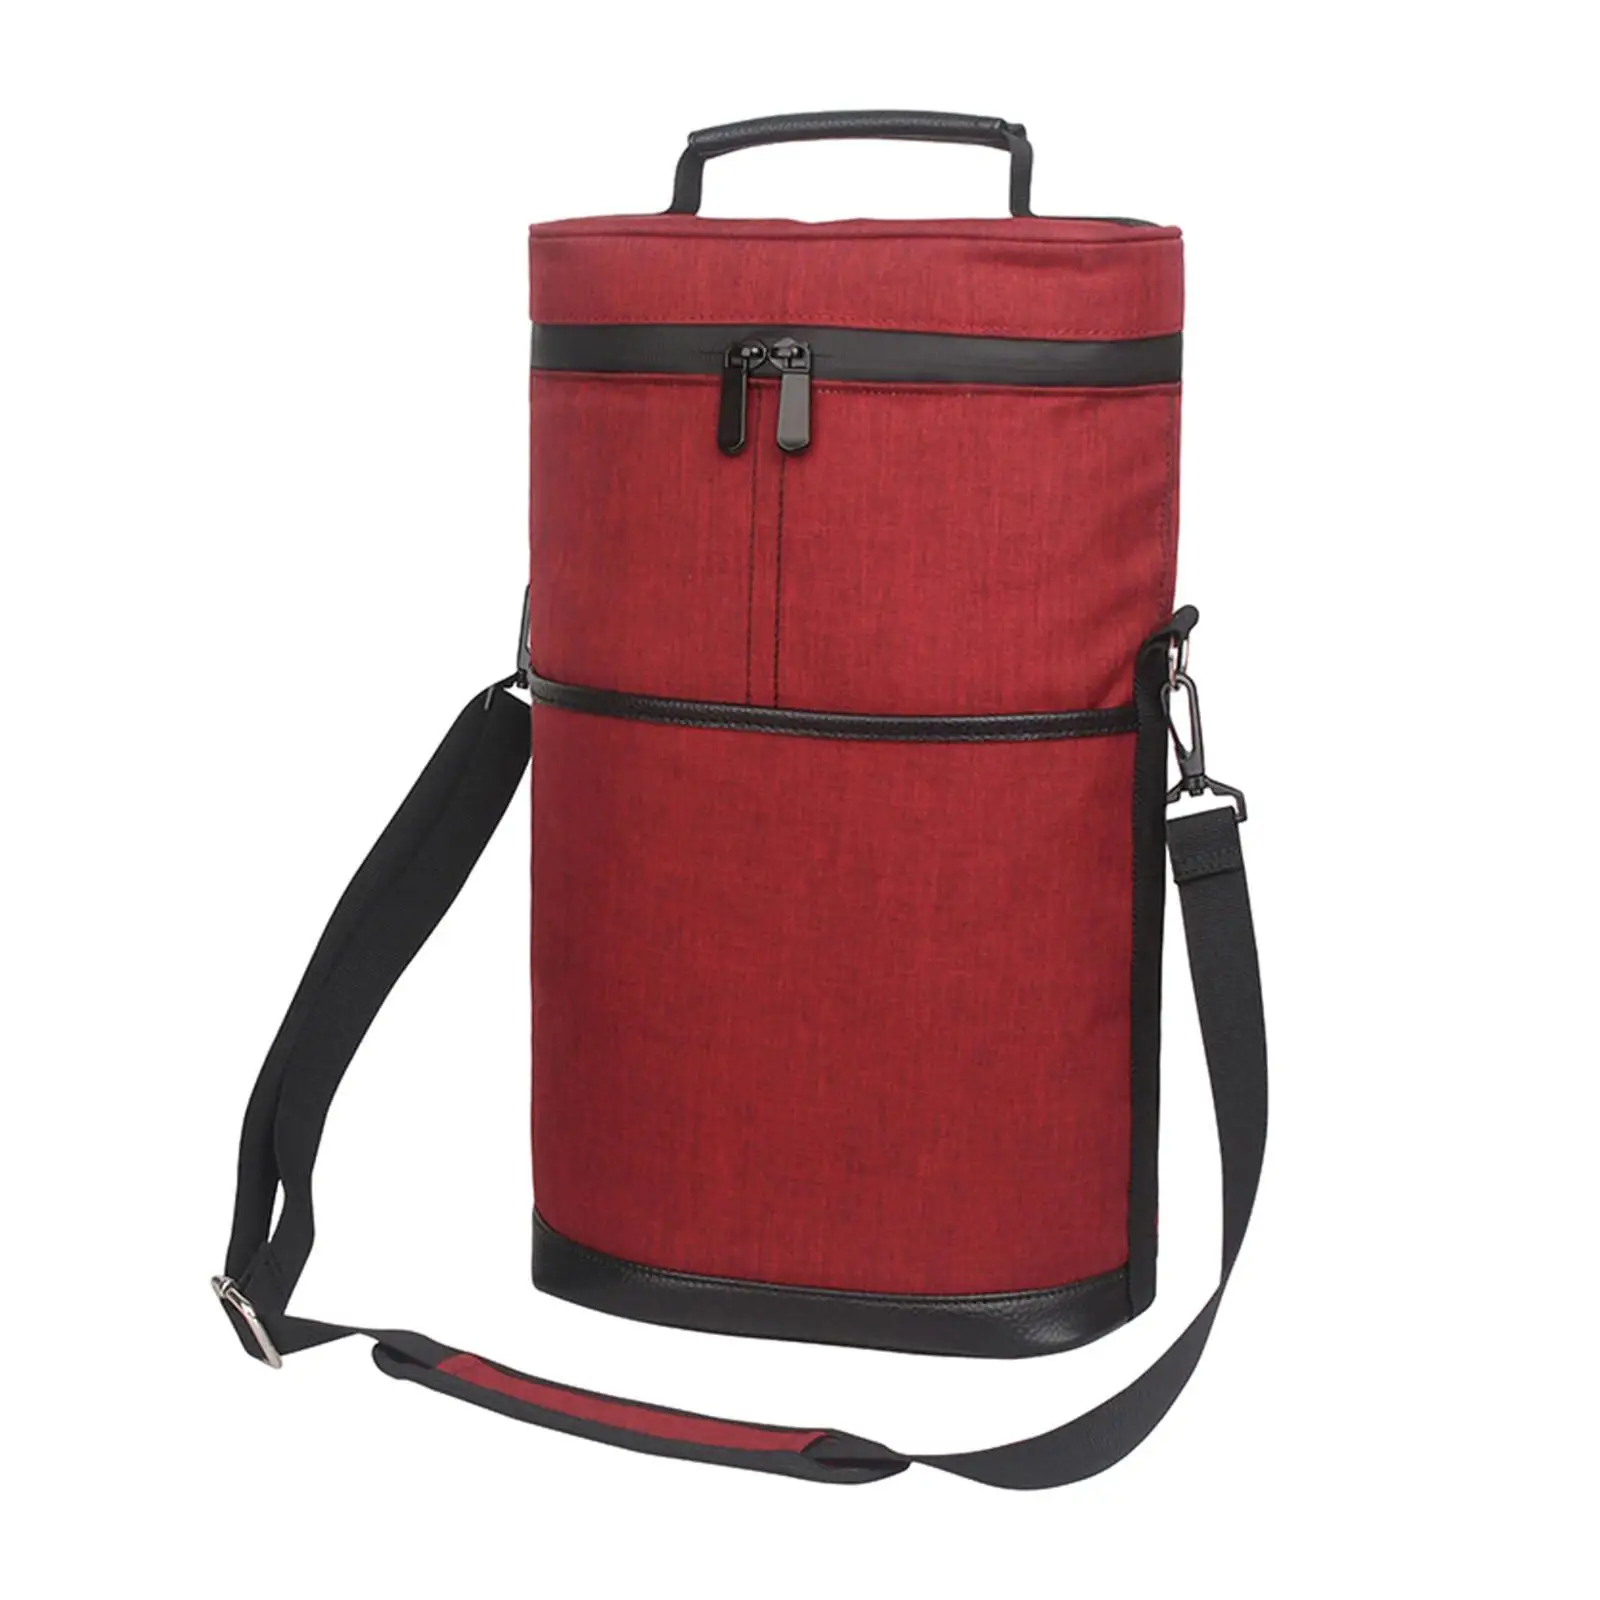 Thermal Lunch Bag Reusable Zipper with Shoulder Strap and Handle Insulated Cooler Bag for Work Camping Picnic Hiking Travel